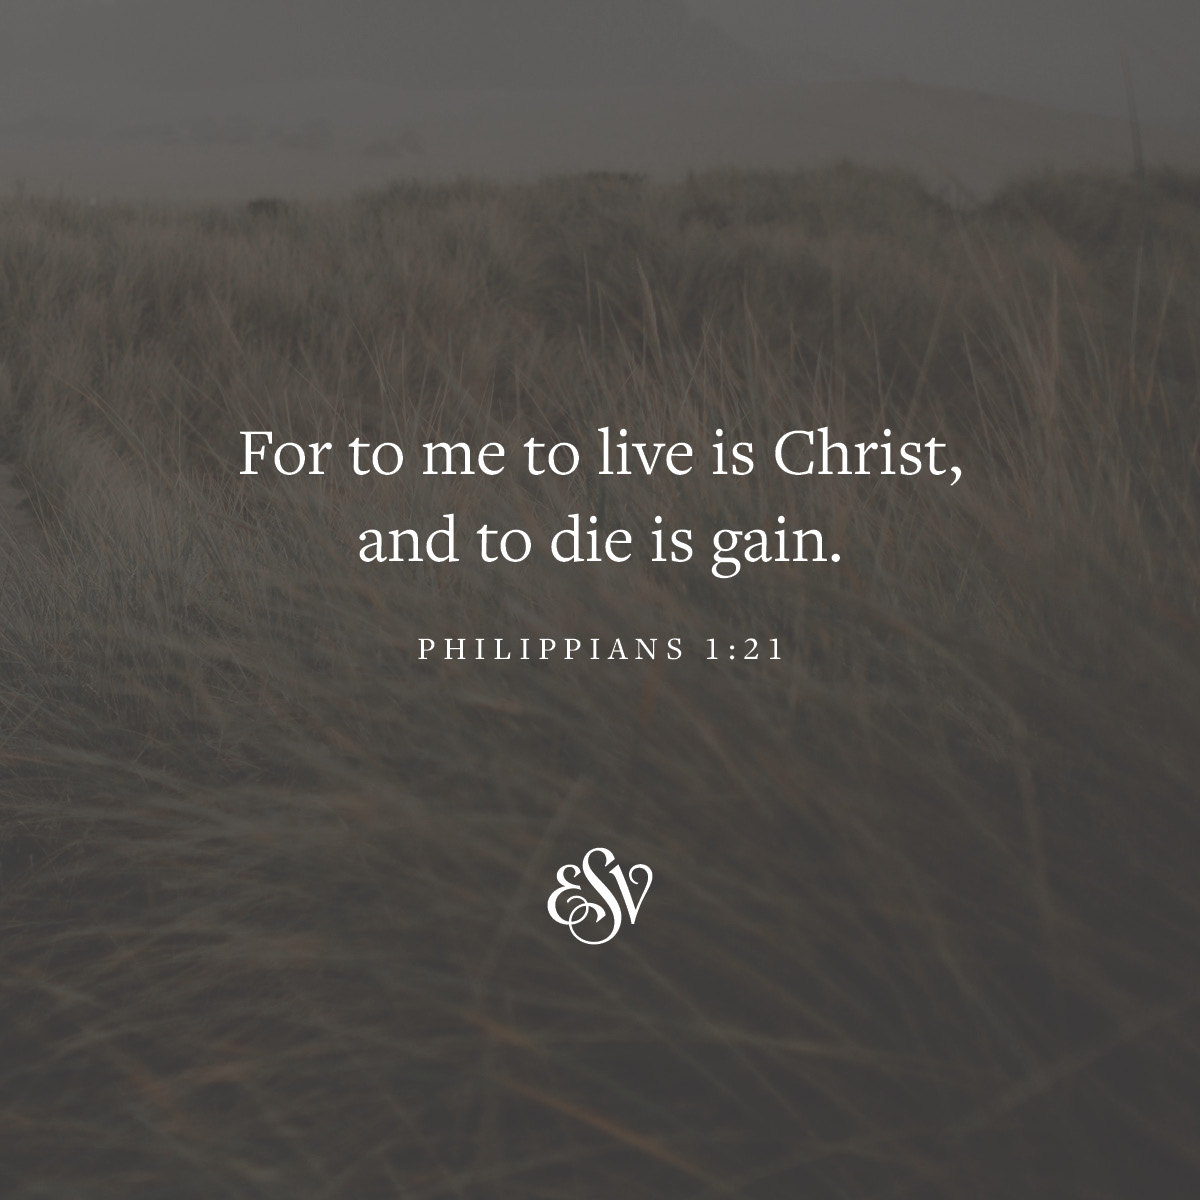 For to me to live is Christ, and to die is gain. 
—Philippians 1:21 ESV 

#Verseoftheday #ESV #Scripturememoryverse #Bible